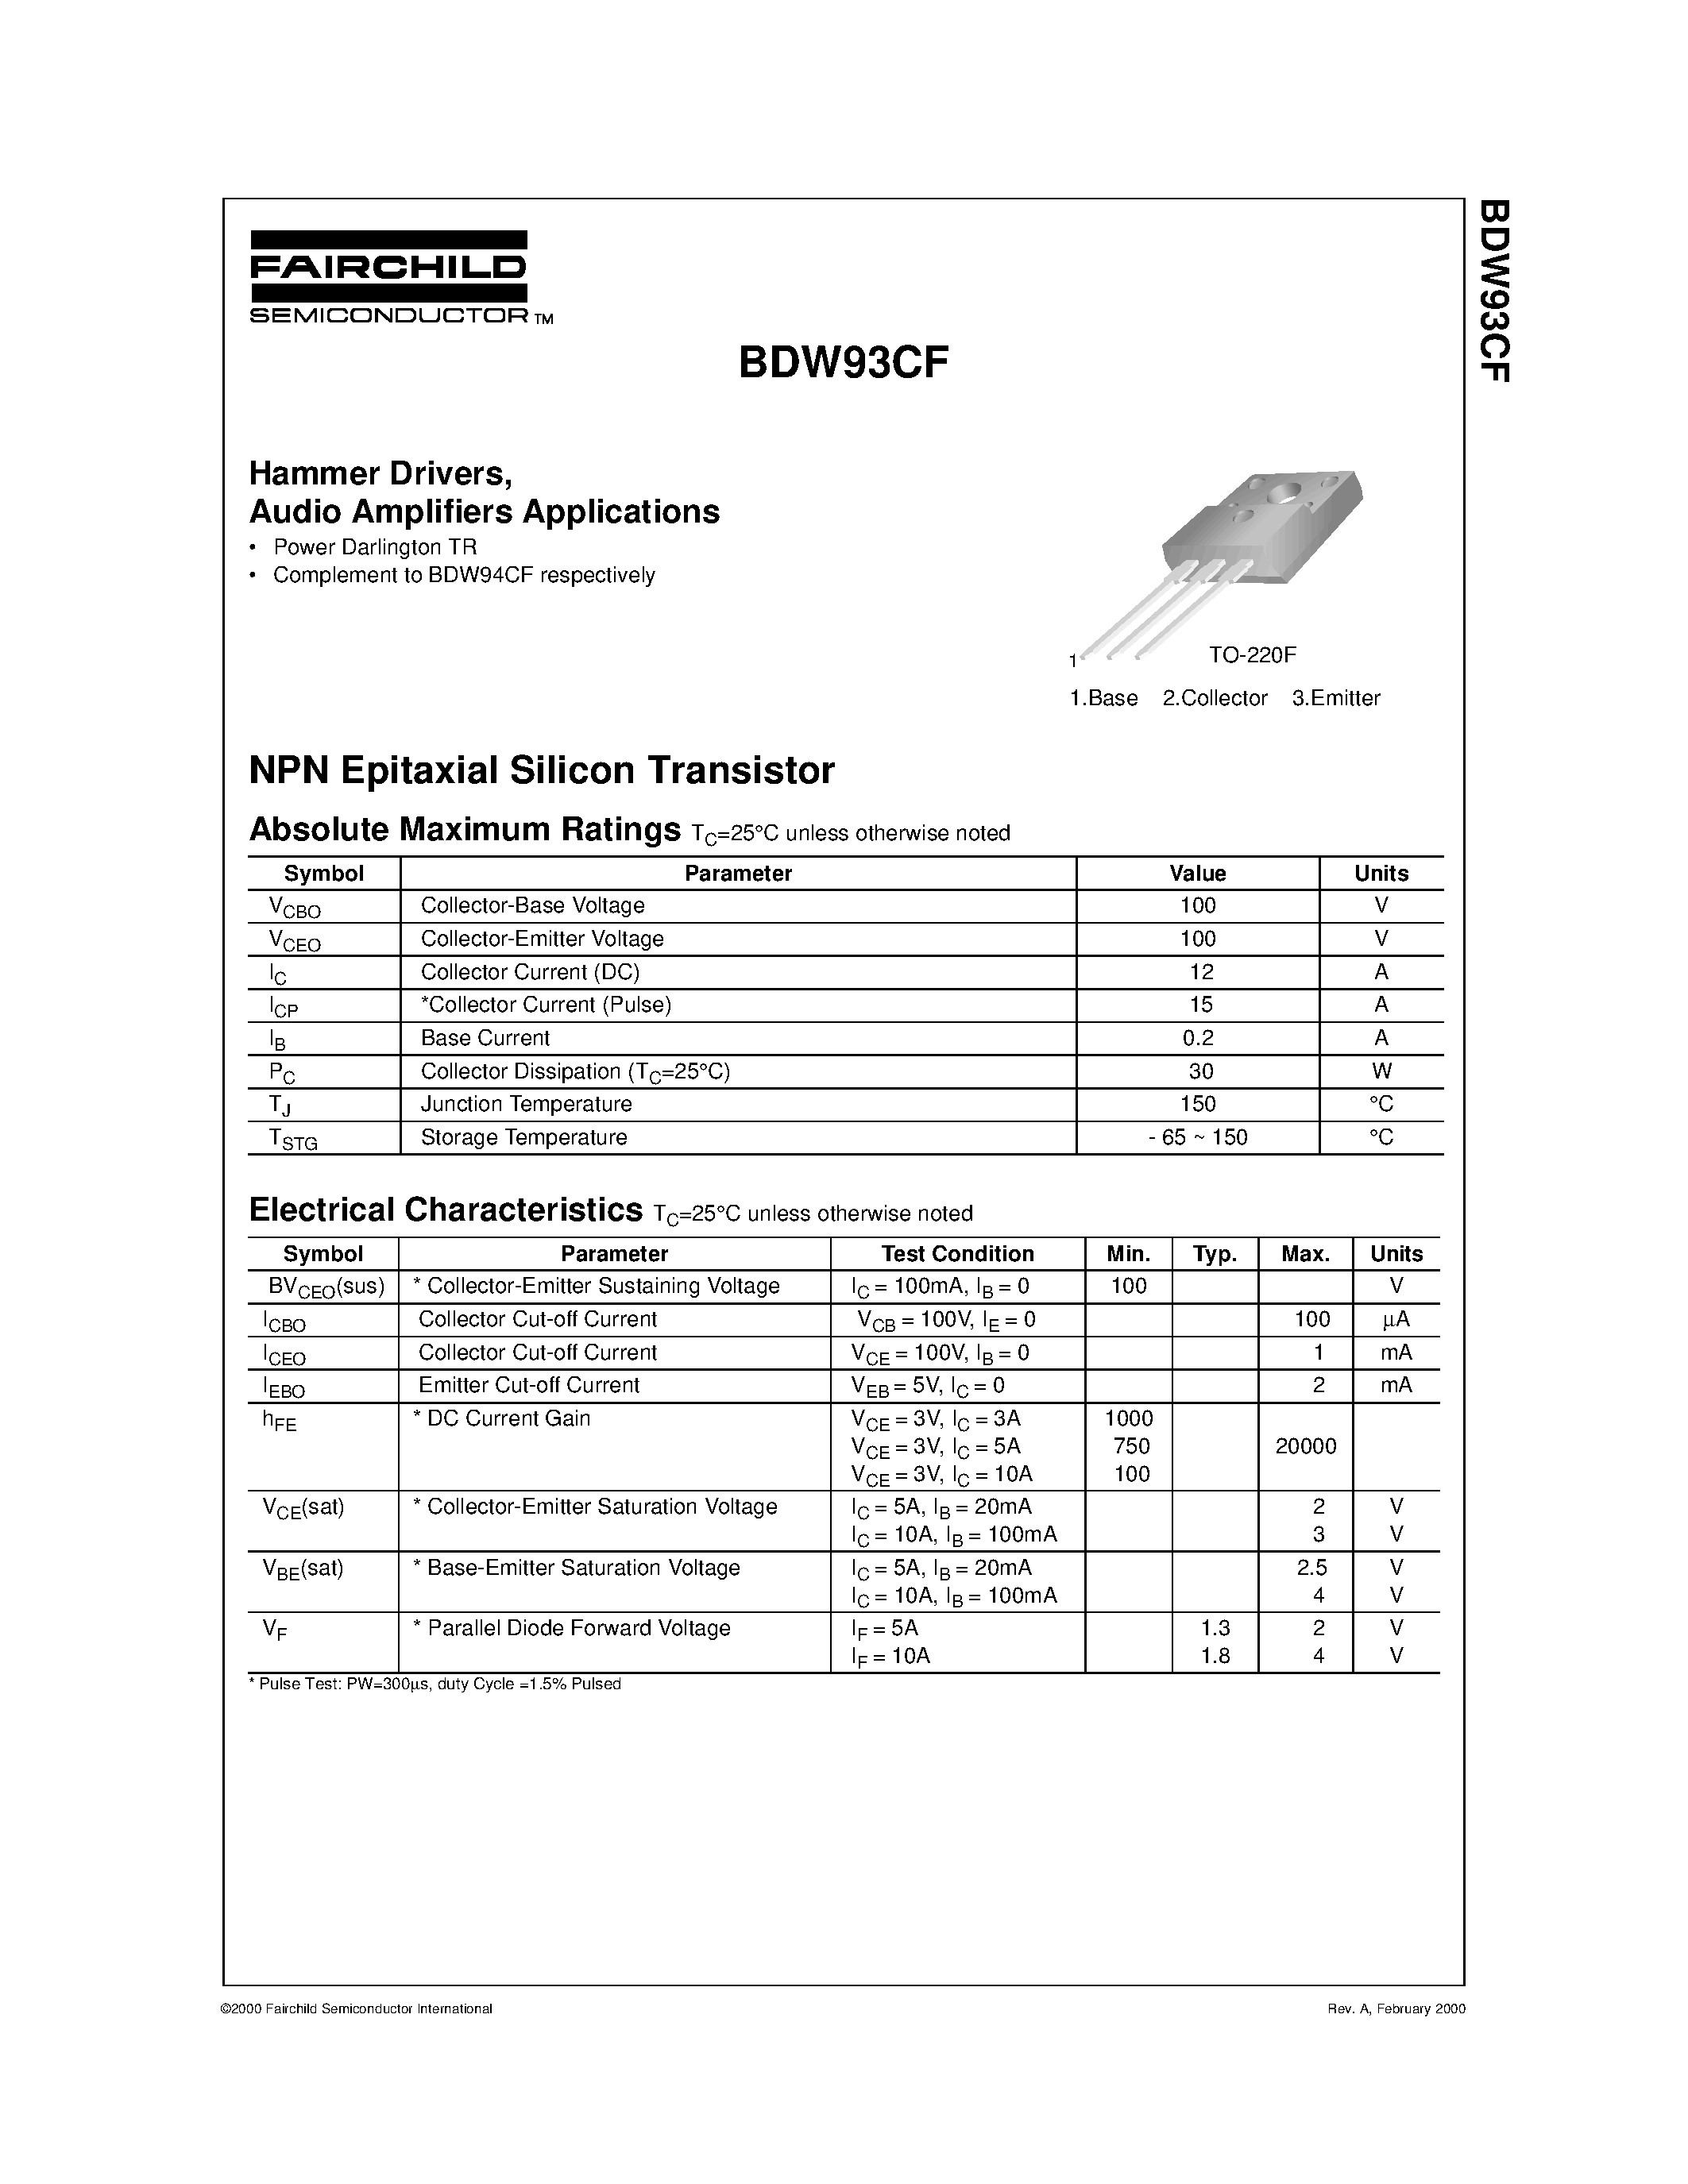 Datasheet BDW93CF - Hammer Drivers/ Audio Amplifiers Applications page 1